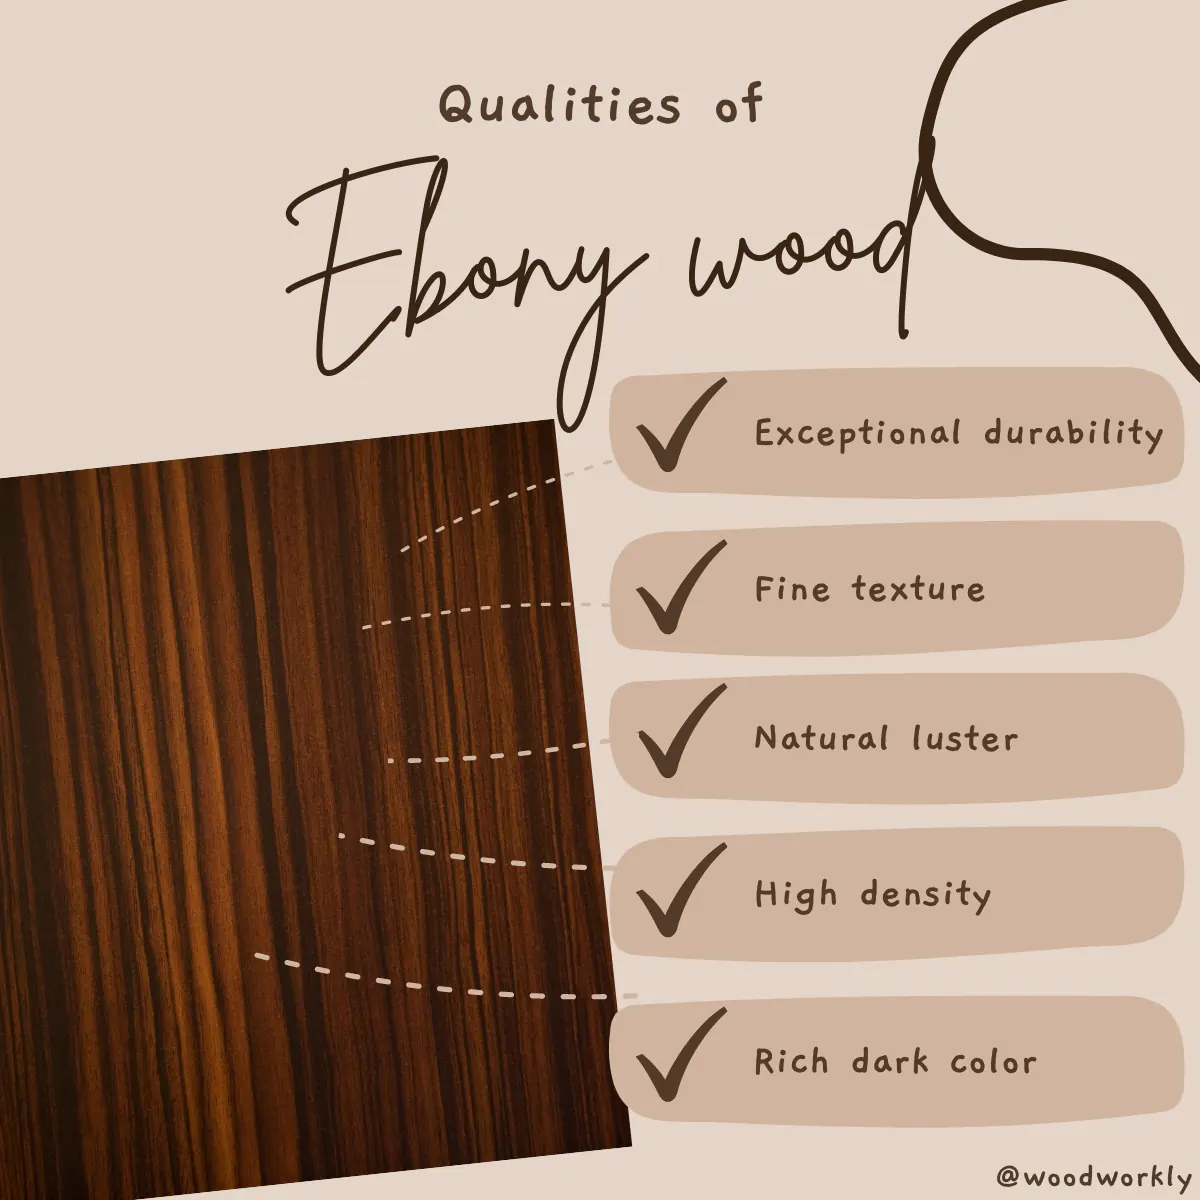 Qualities of Ebony wood important when making a bed frame